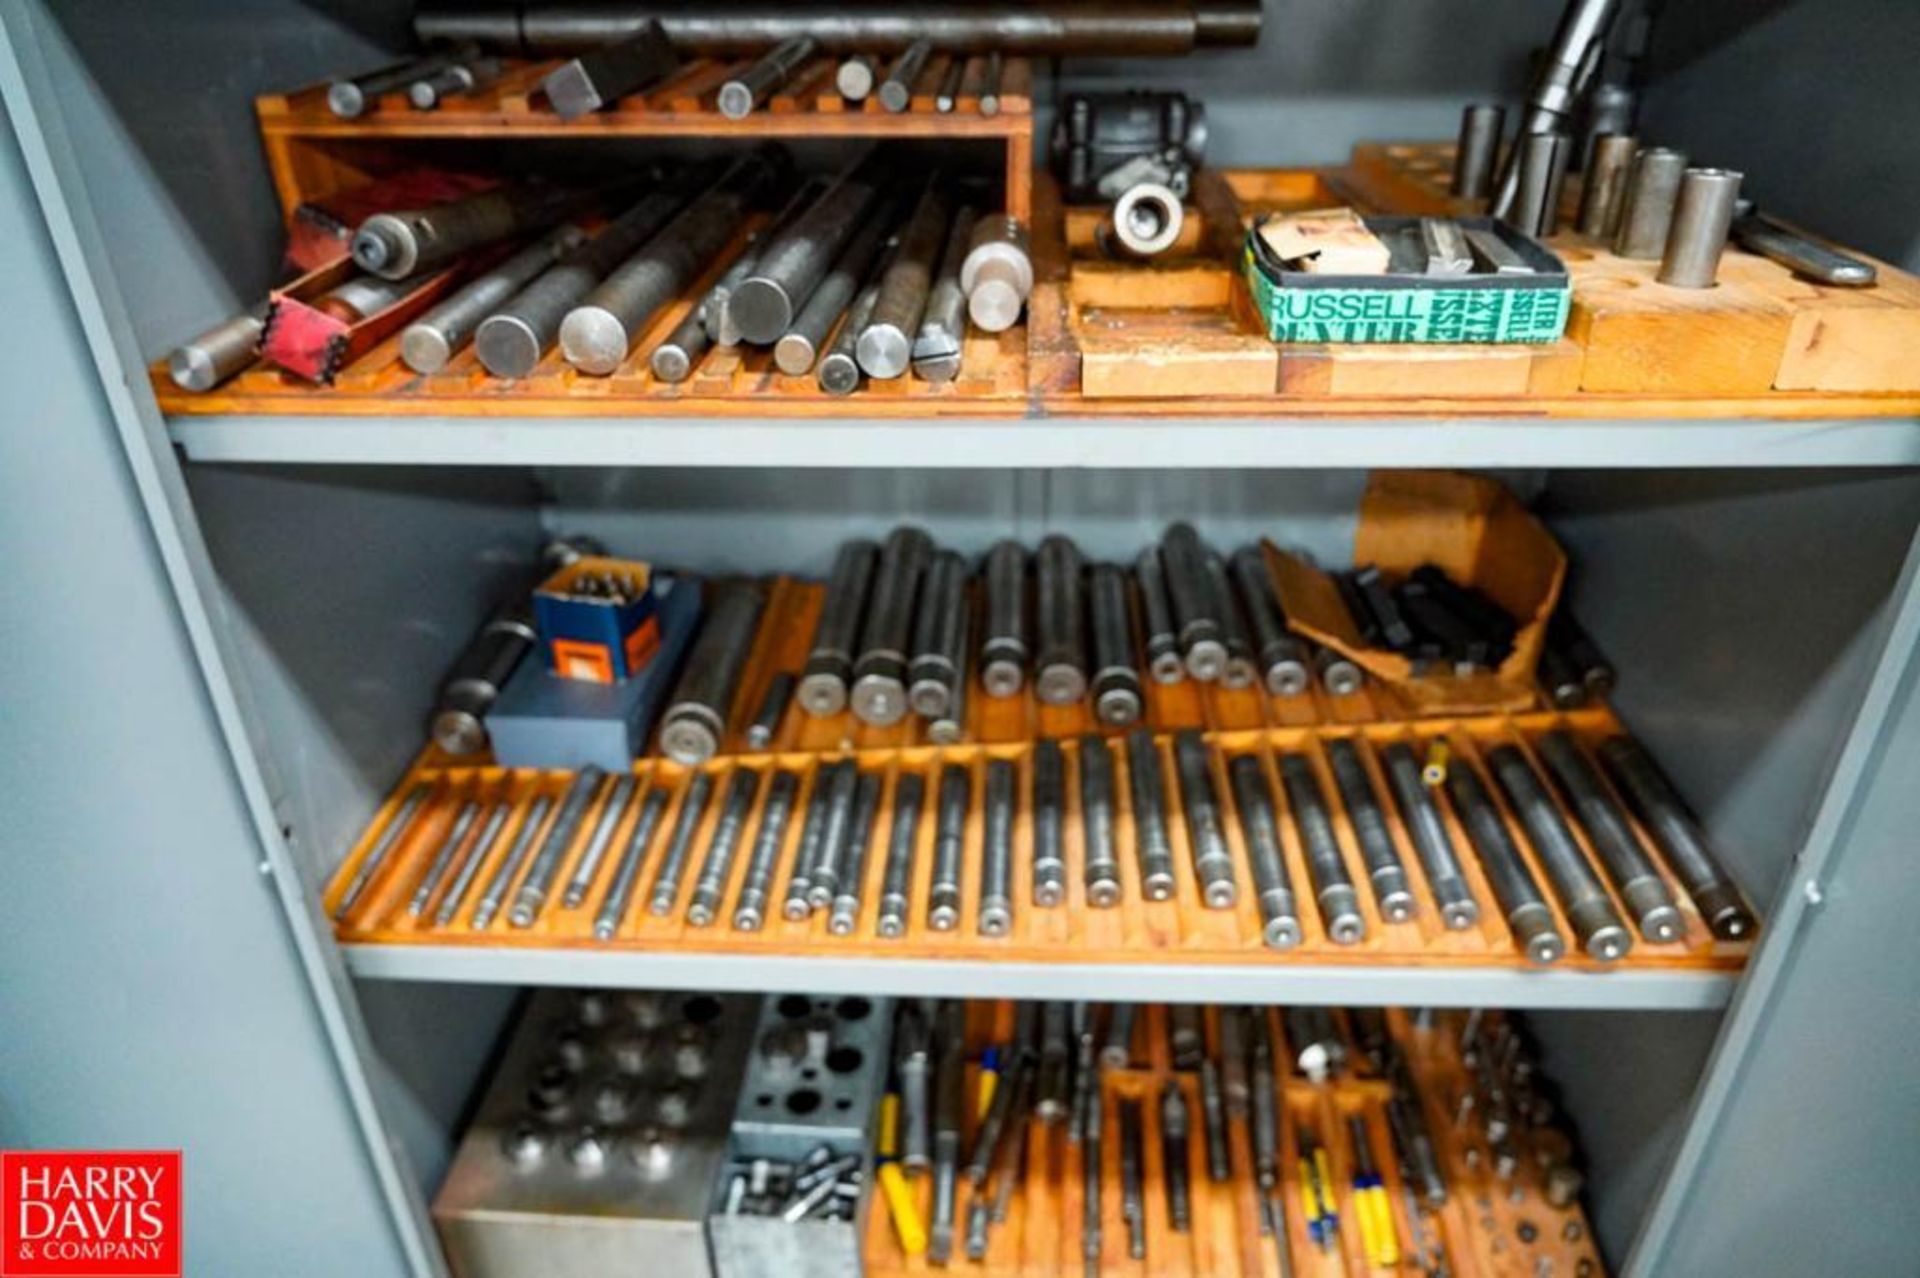 Contents of Tool Storage Crib 1 (3) 2 Door Metal Cabinet Filled with Lathe Tooling Bars, Collets, Dr - Image 9 of 24